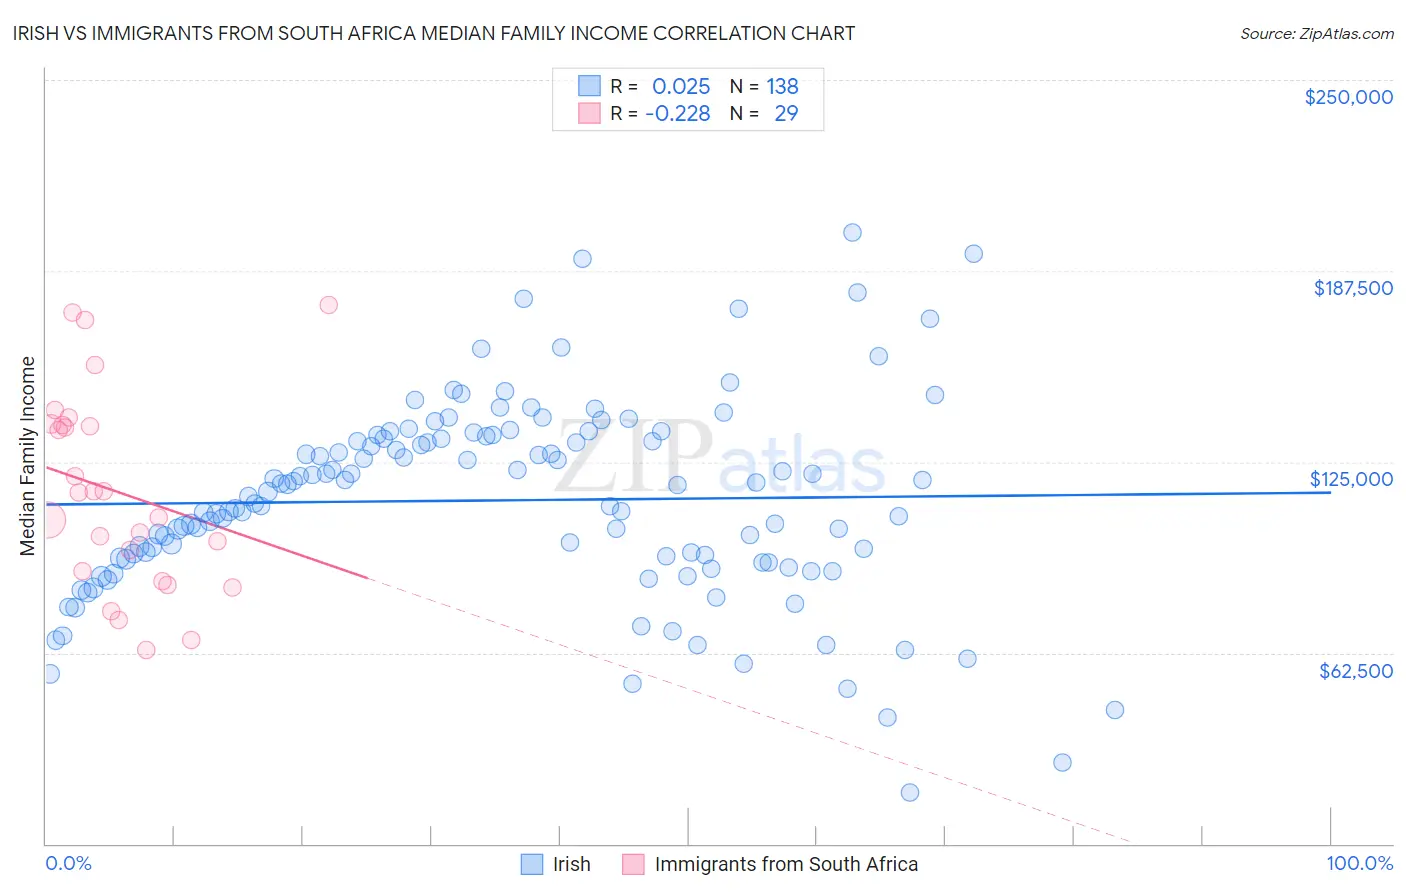 Irish vs Immigrants from South Africa Median Family Income